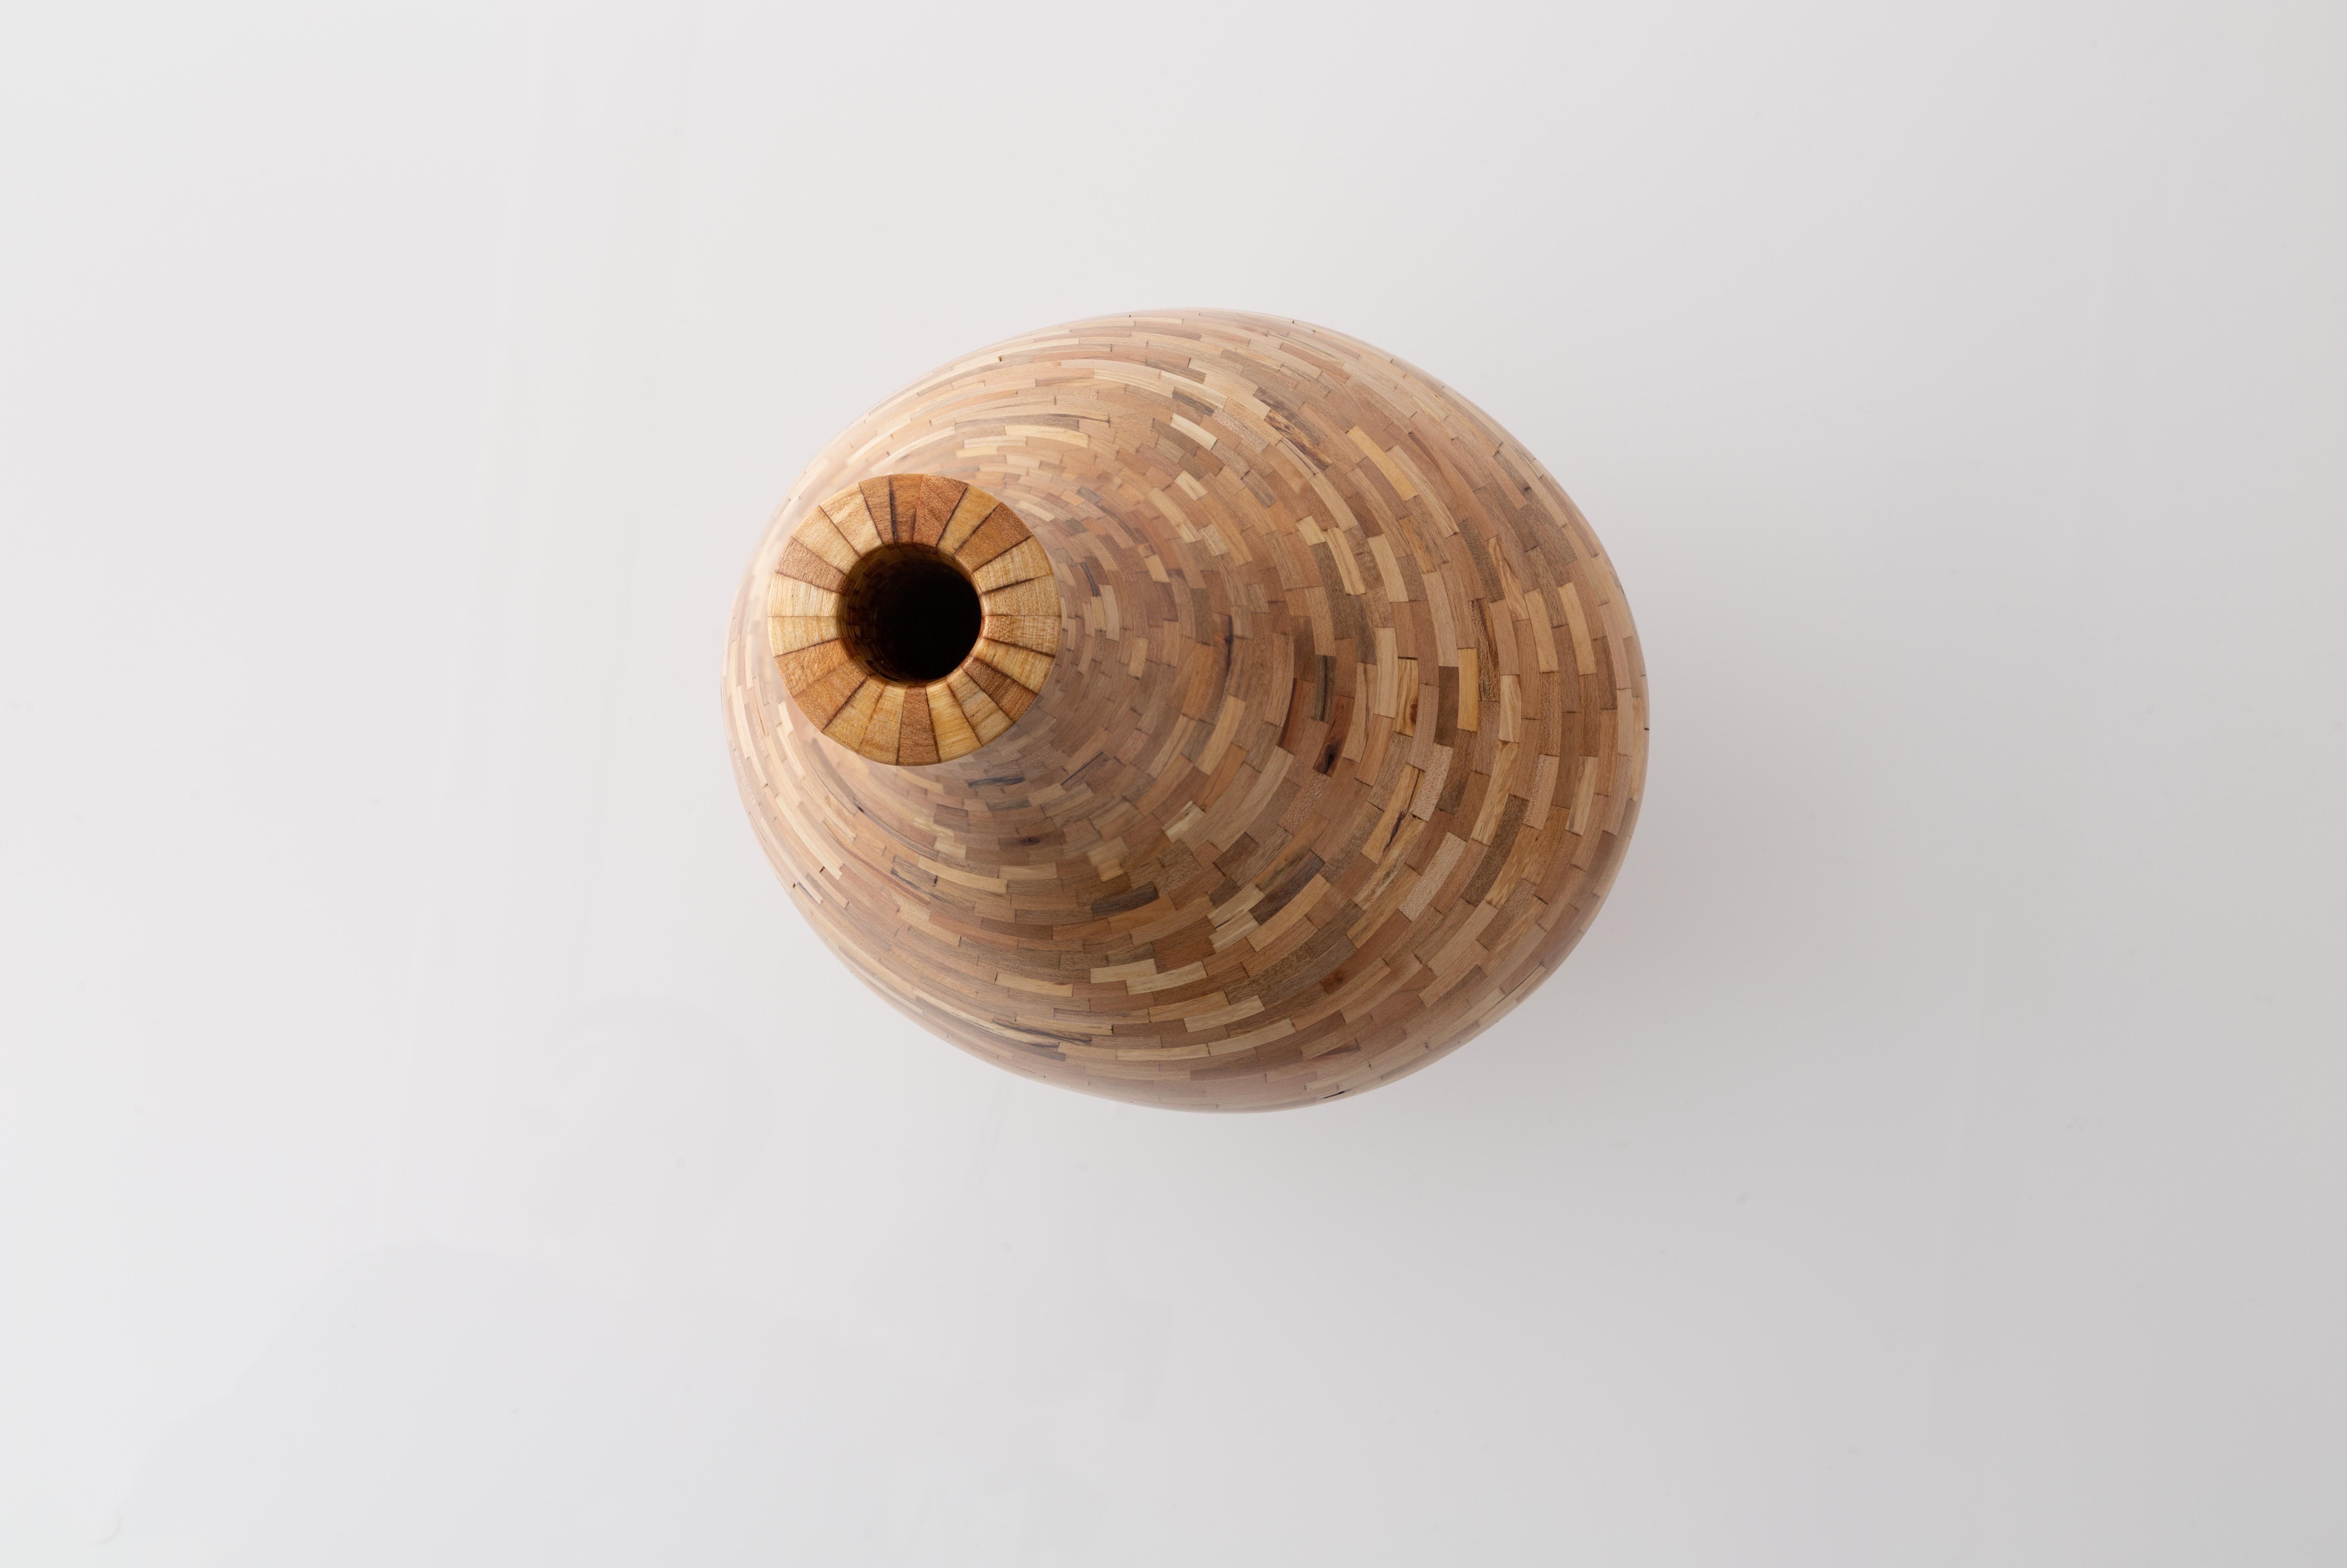 Parquetry Contemporary Spalted Maple  Goose Neck Vase #2 by Richard Haining Available Now